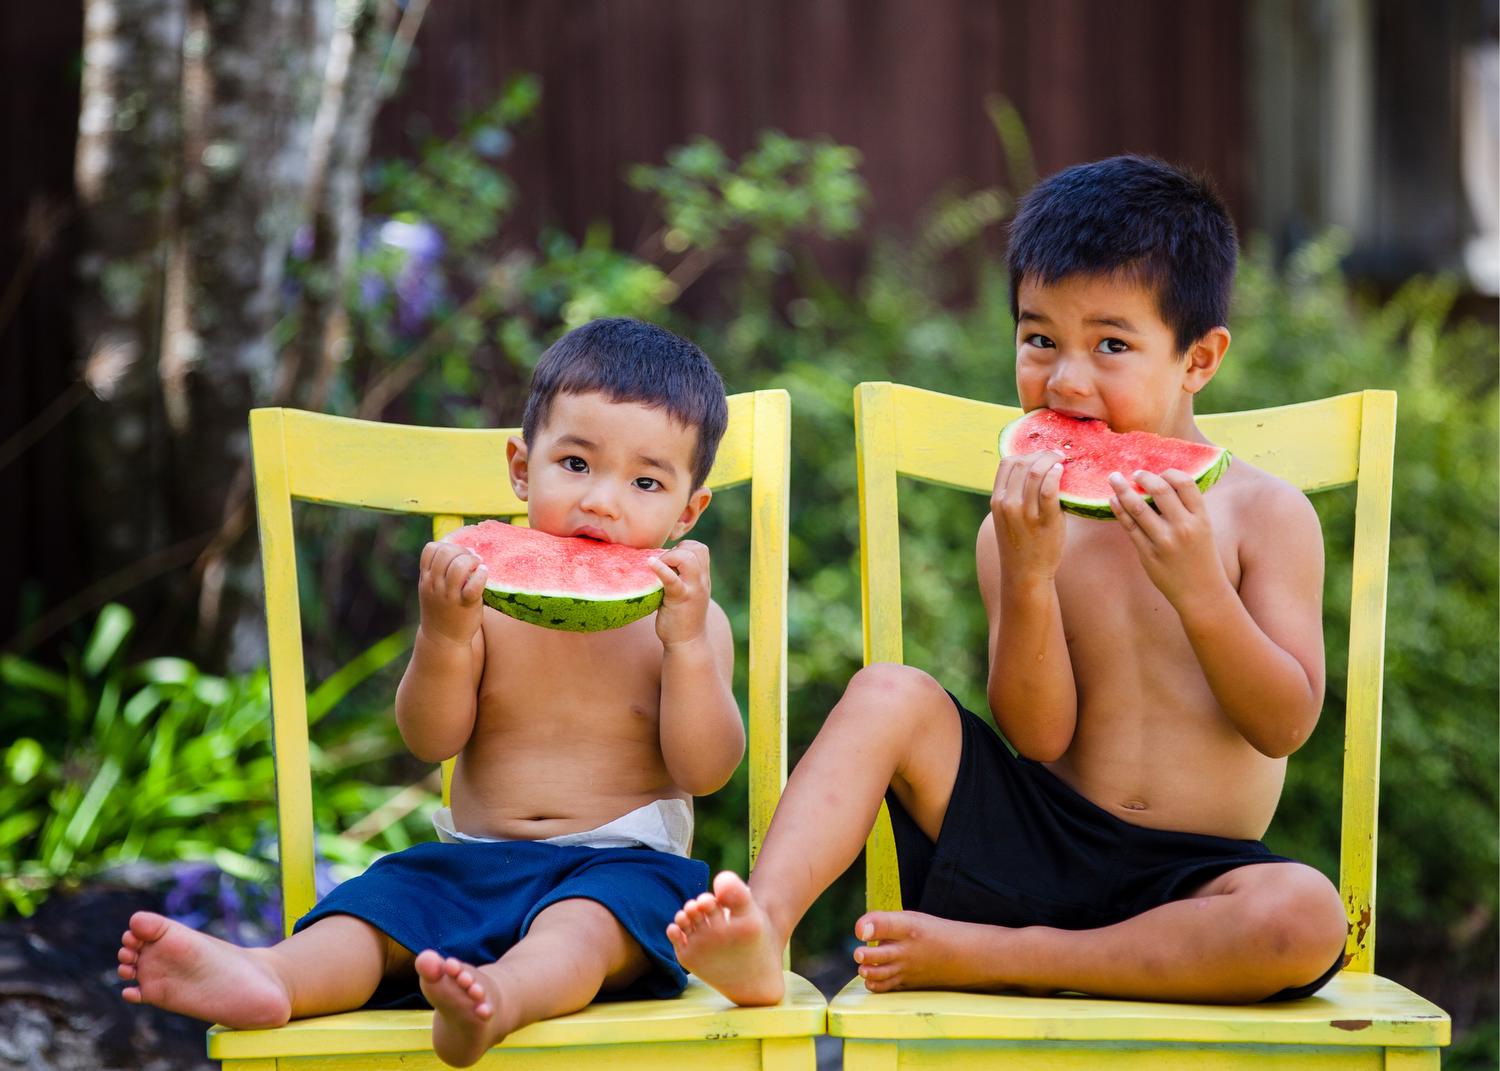 Two young boys sitting in yellow chairs each eating a slice of watermelon outside